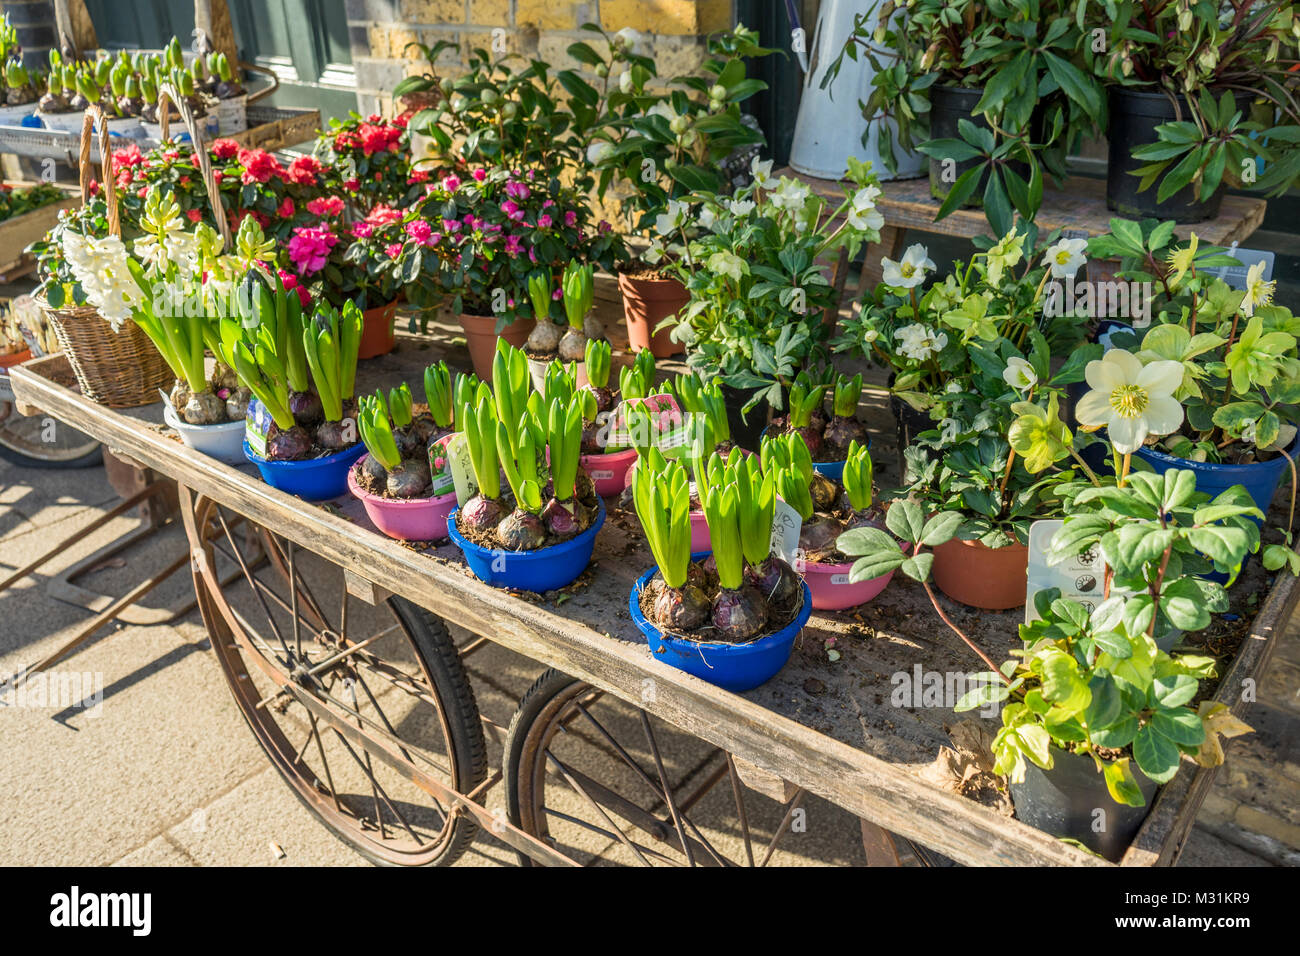 Hyacinth plants before flowering in brightly coloured pots on a wooden cart in a flower/ plant shop Stock Photo